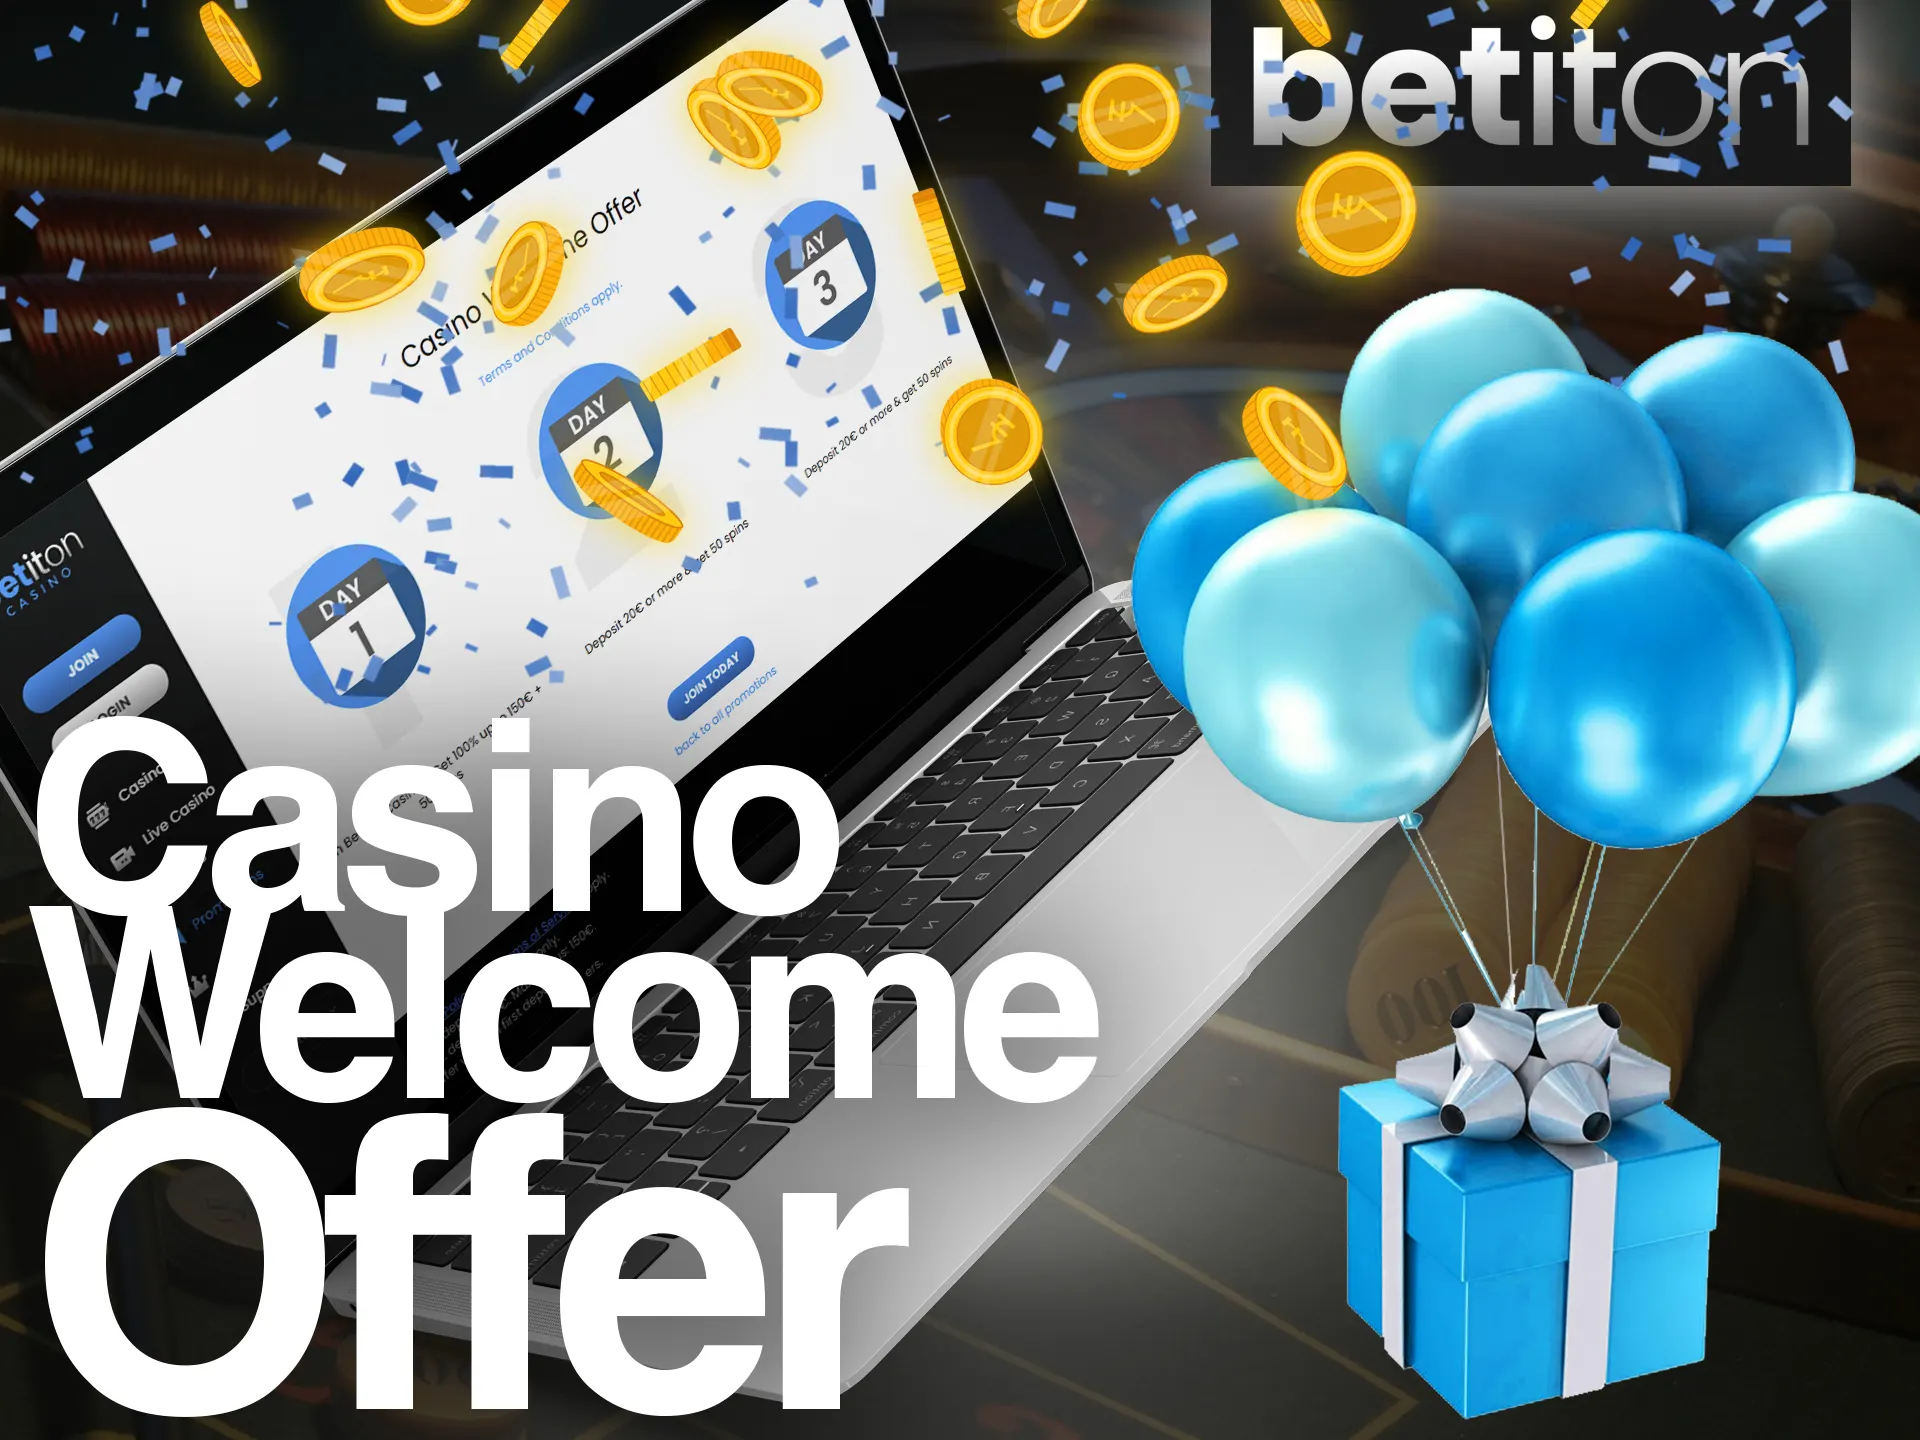 Get a casino welcome bonus after playing casino games at the Betiton.